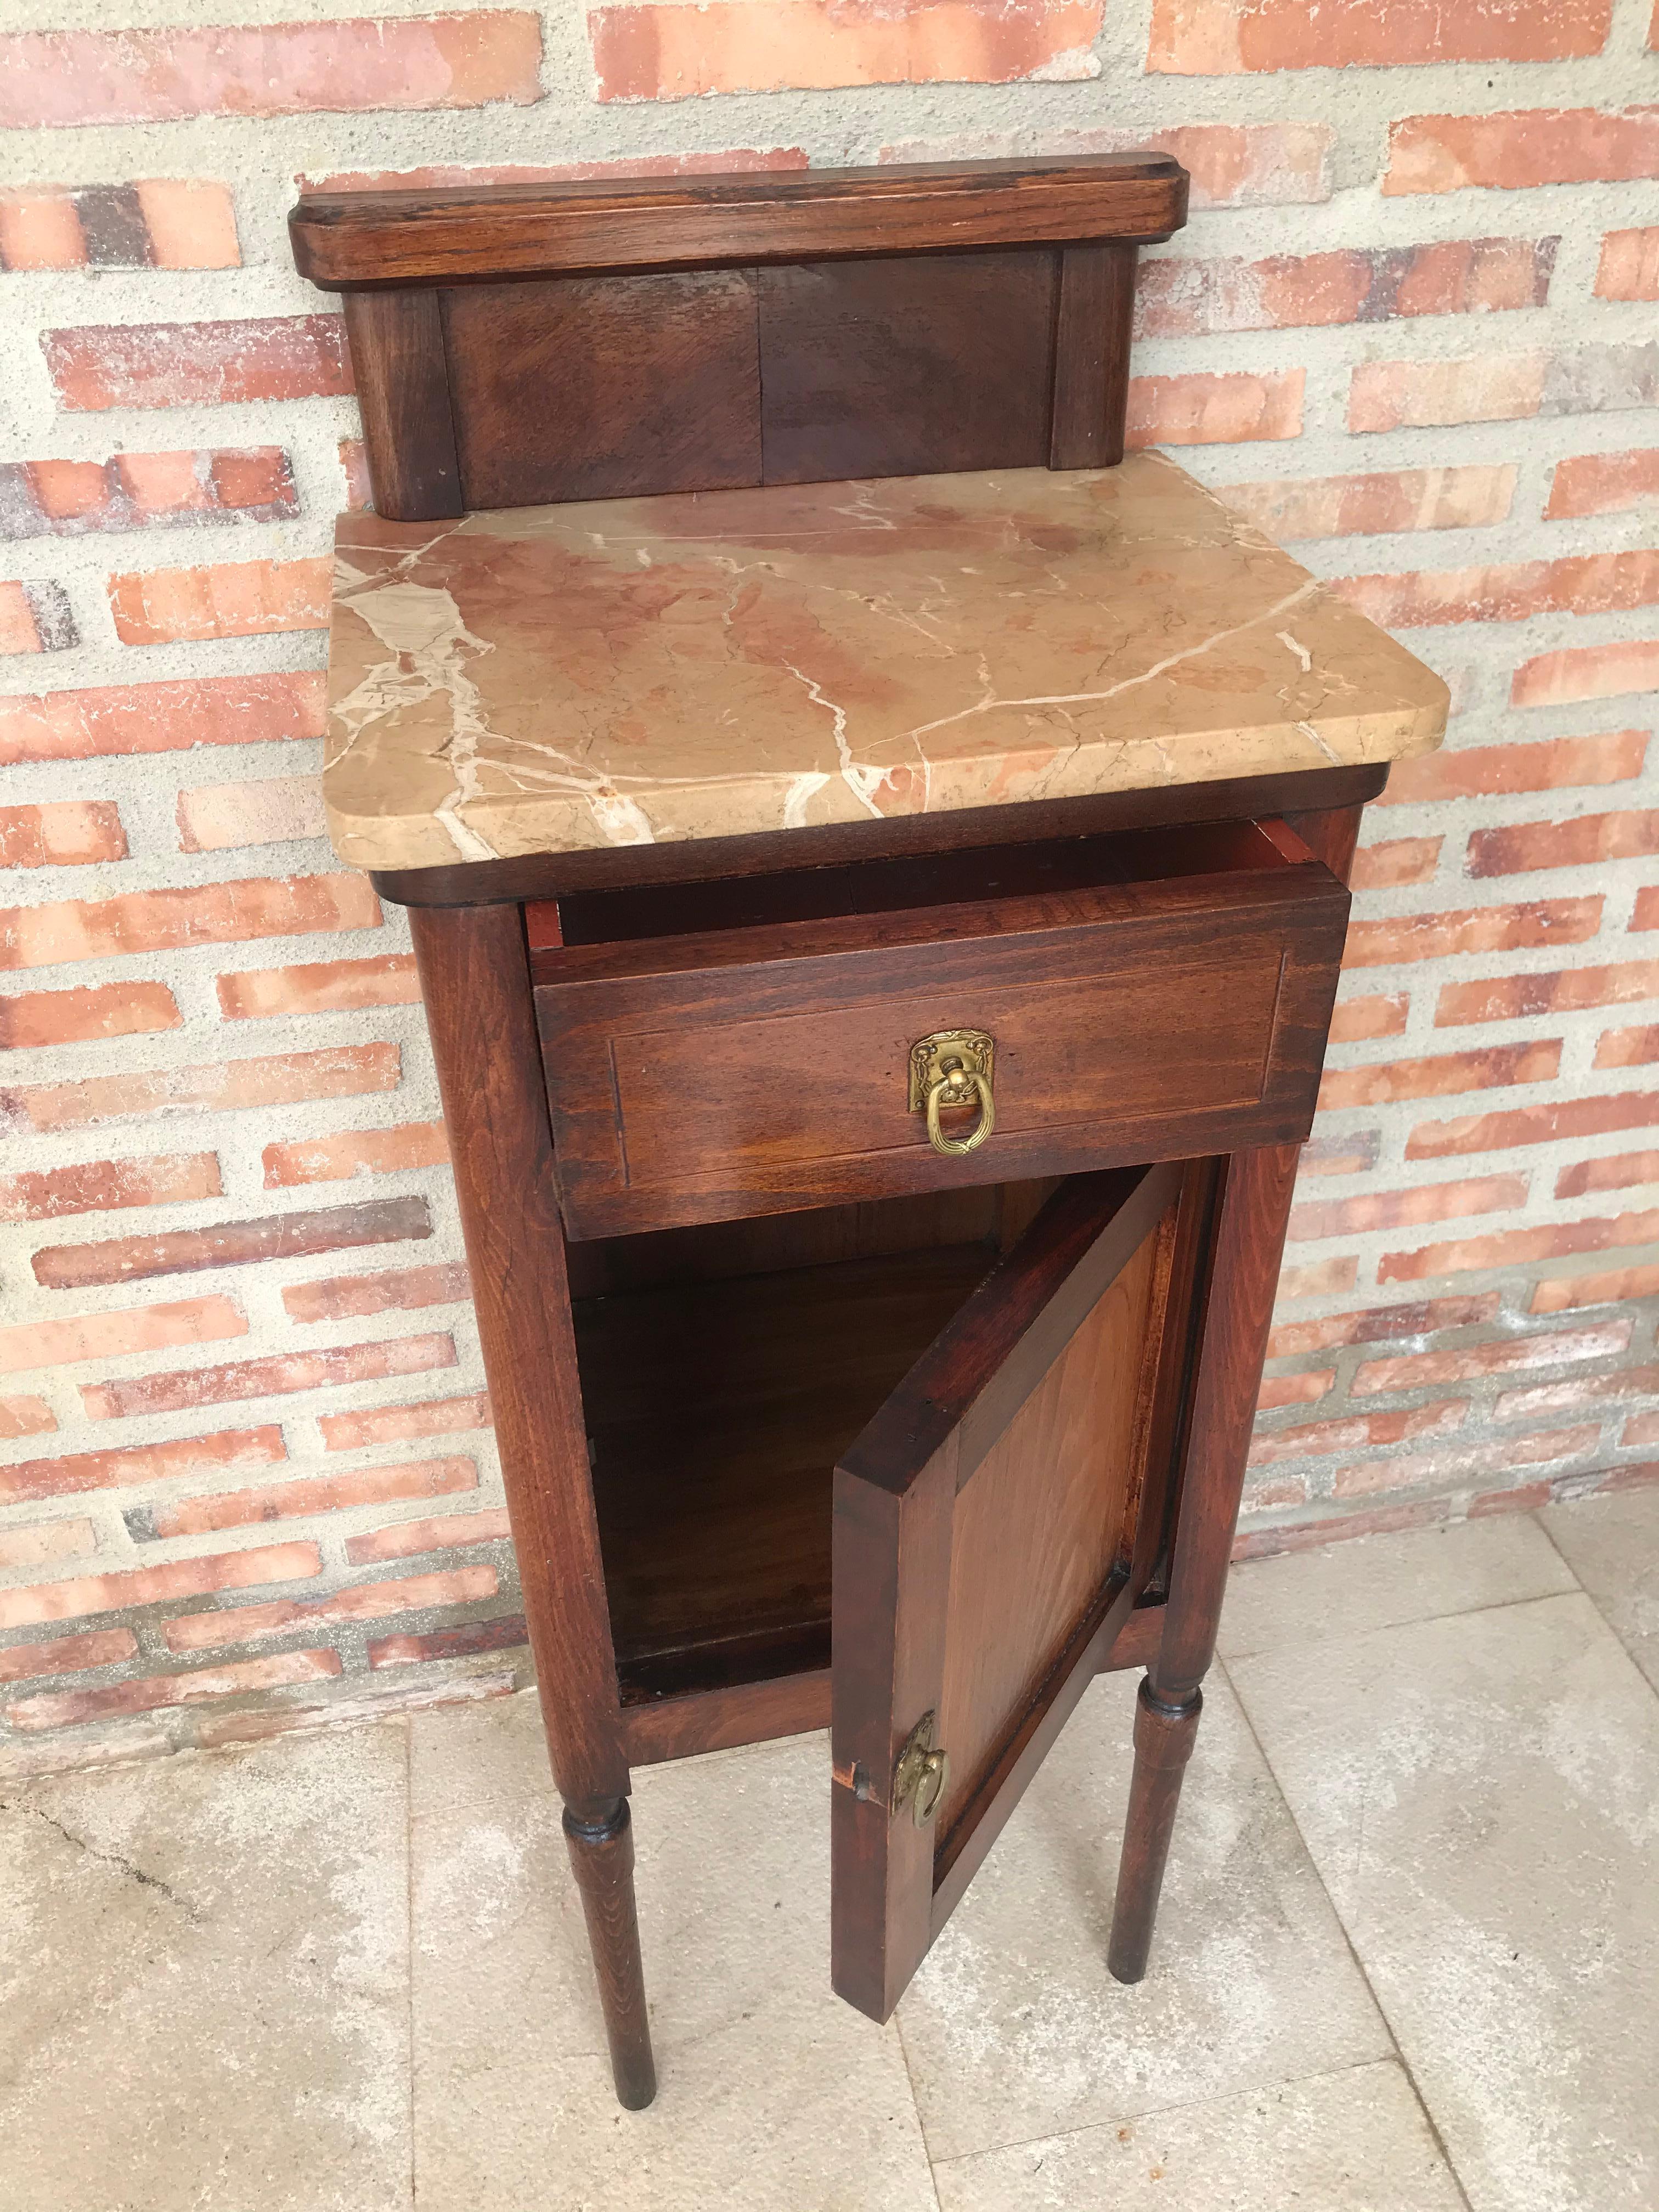 French Art Nouveau Walnut Nightstand with Crest, Marble Top and Glass Shelve